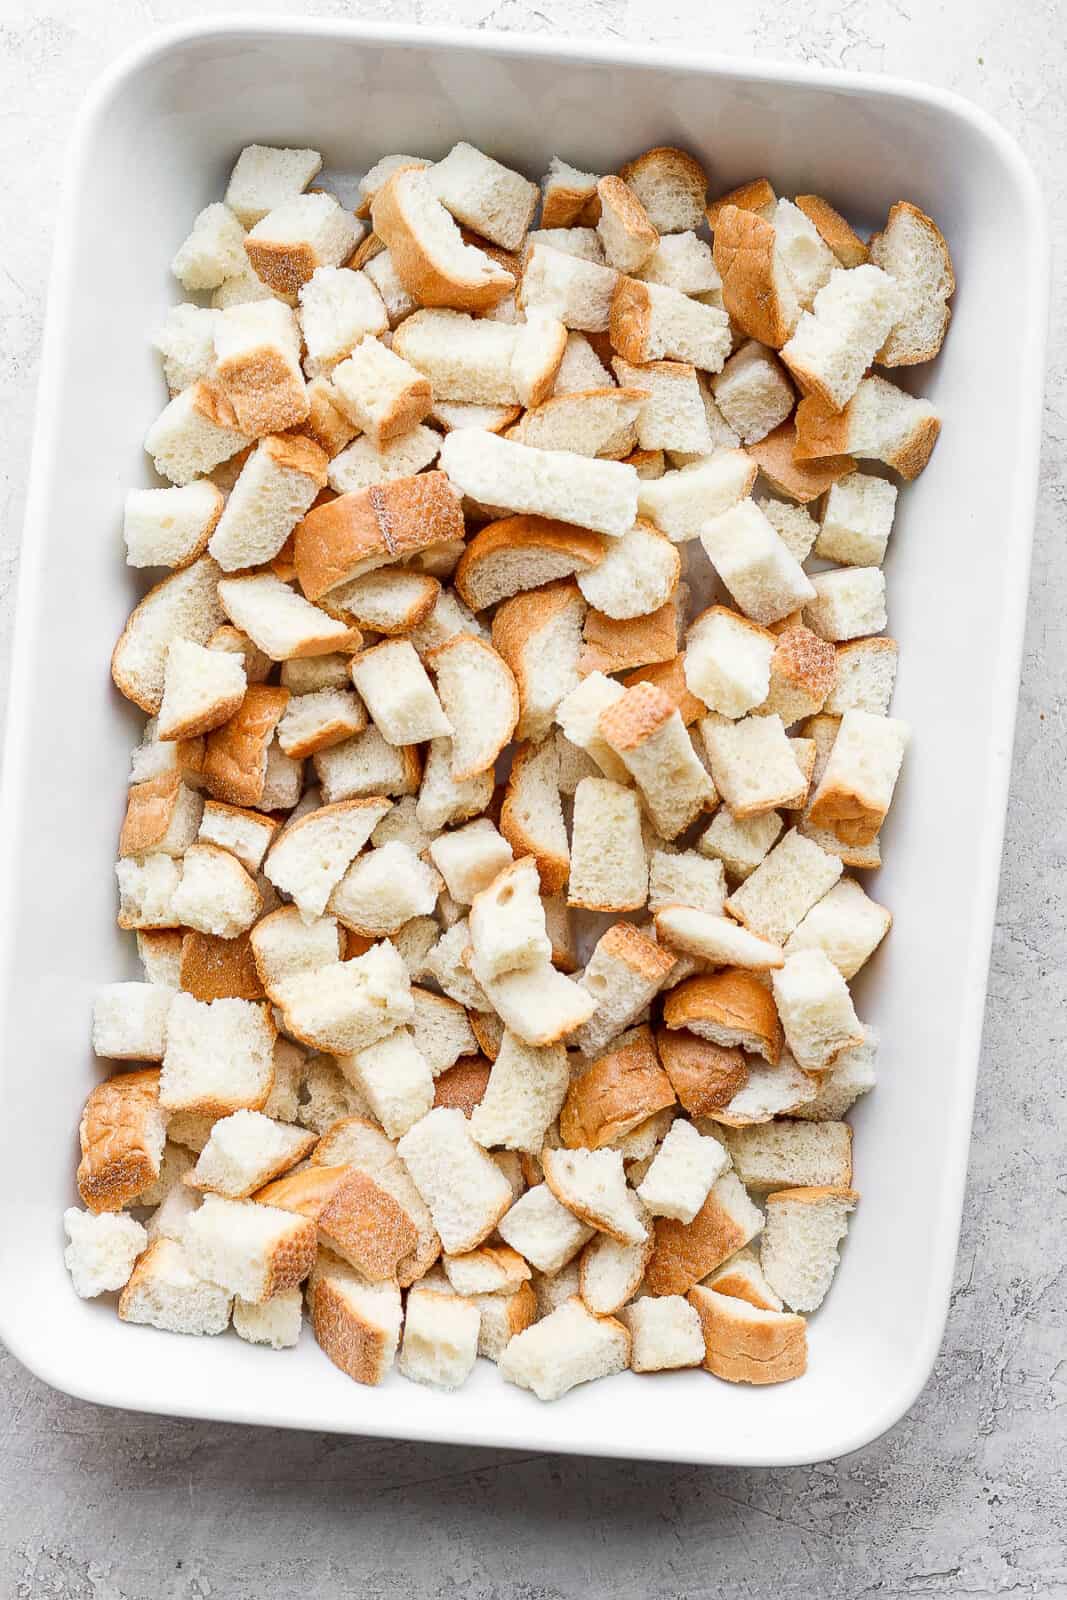 Dried bread cubes in a prepared baking dish.